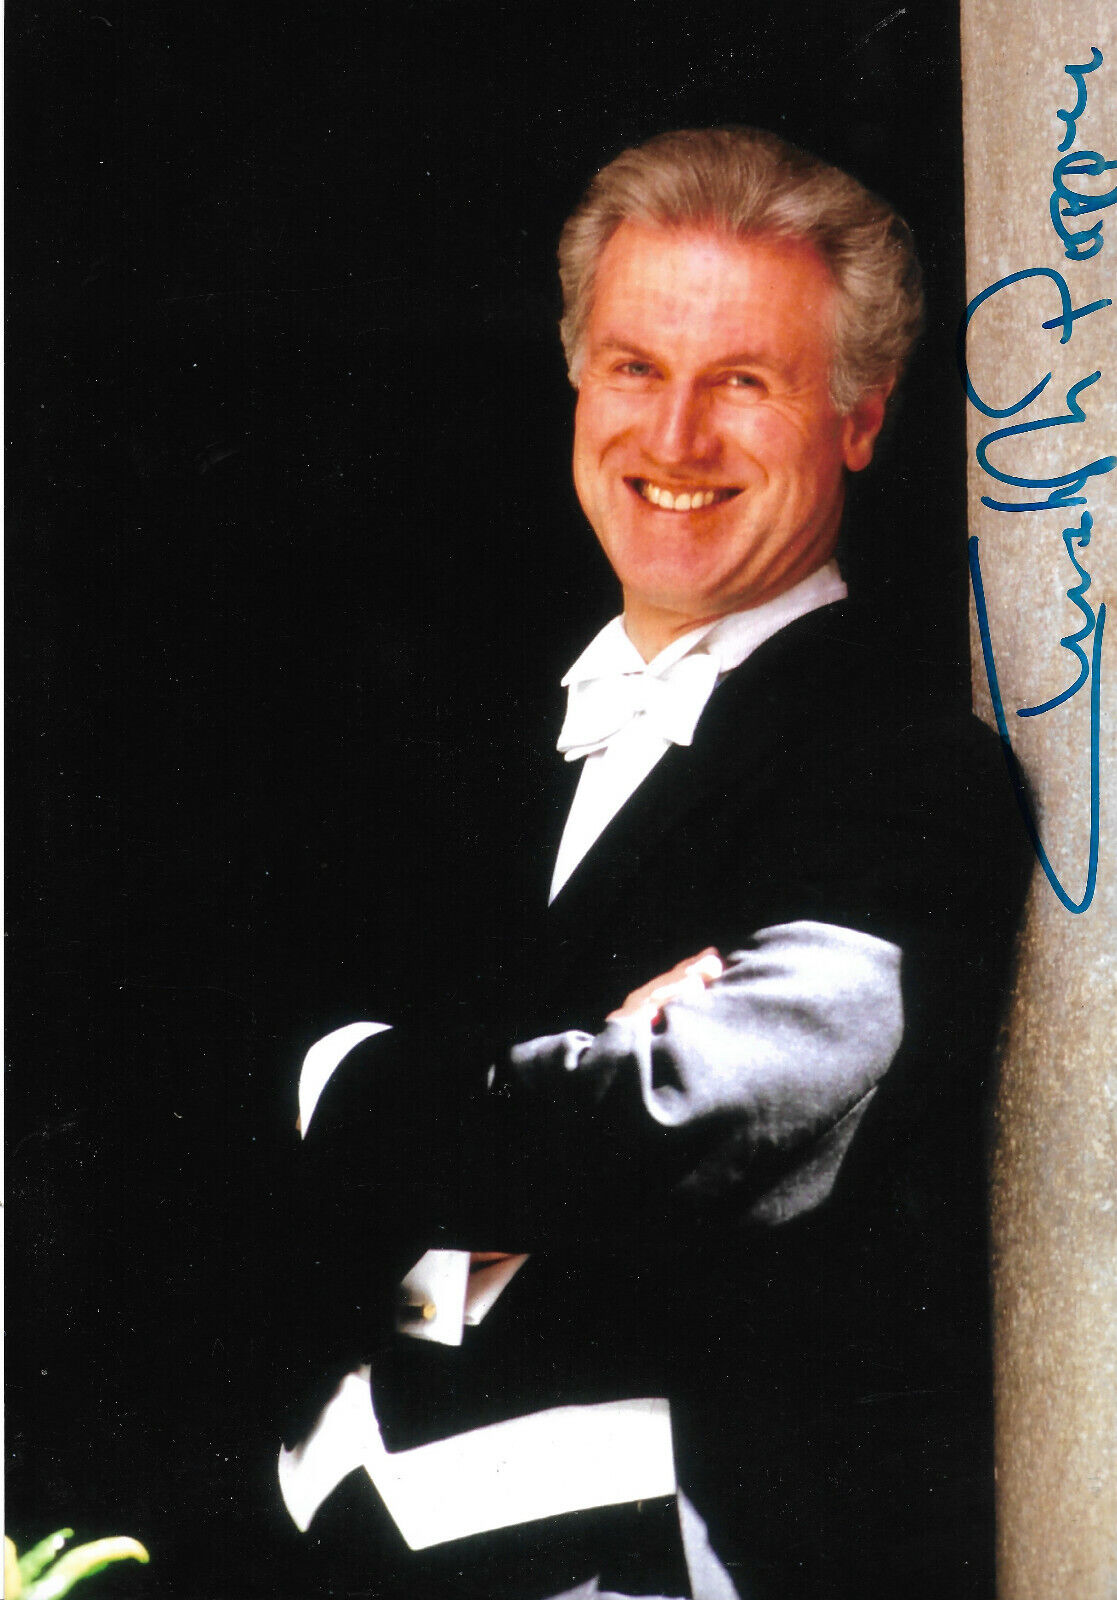 Christoph Poppen Conductor signed 8x12 inch Photo Poster painting autograph